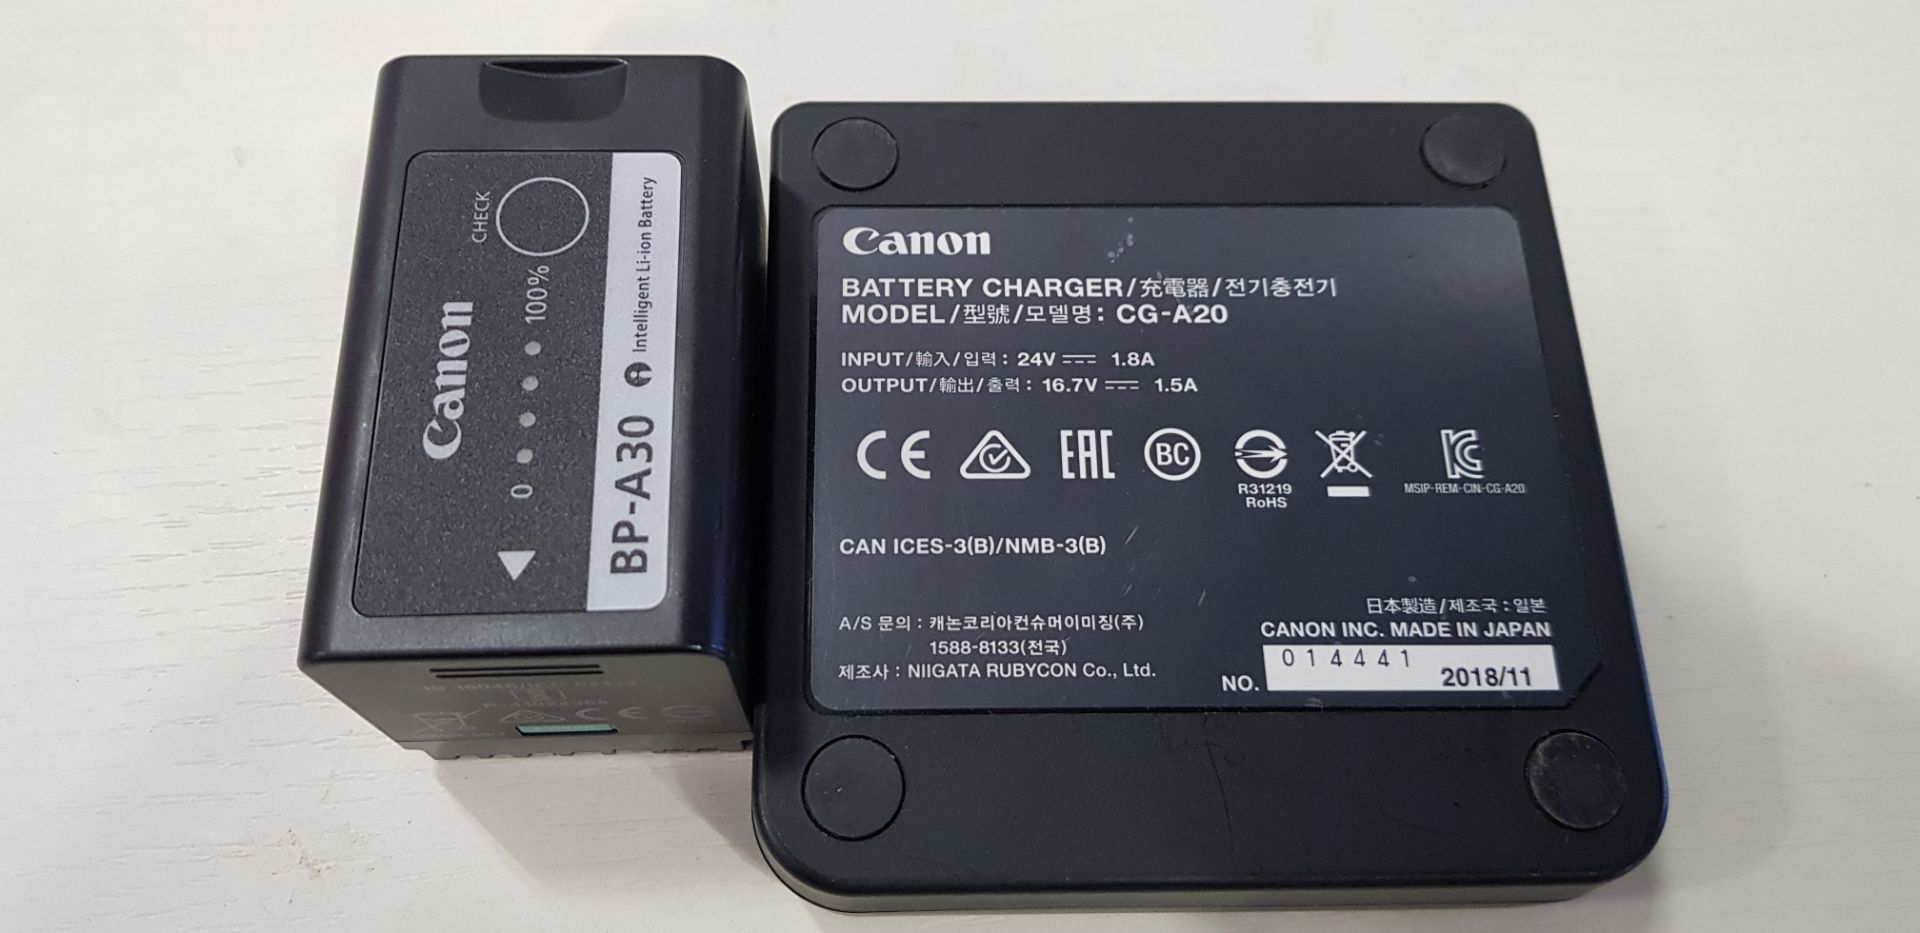 CANON CG-A20 BATTERY CHARGER WITH POWER CABLE & 1 X BP-A30 BATTERY - Image 2 of 2